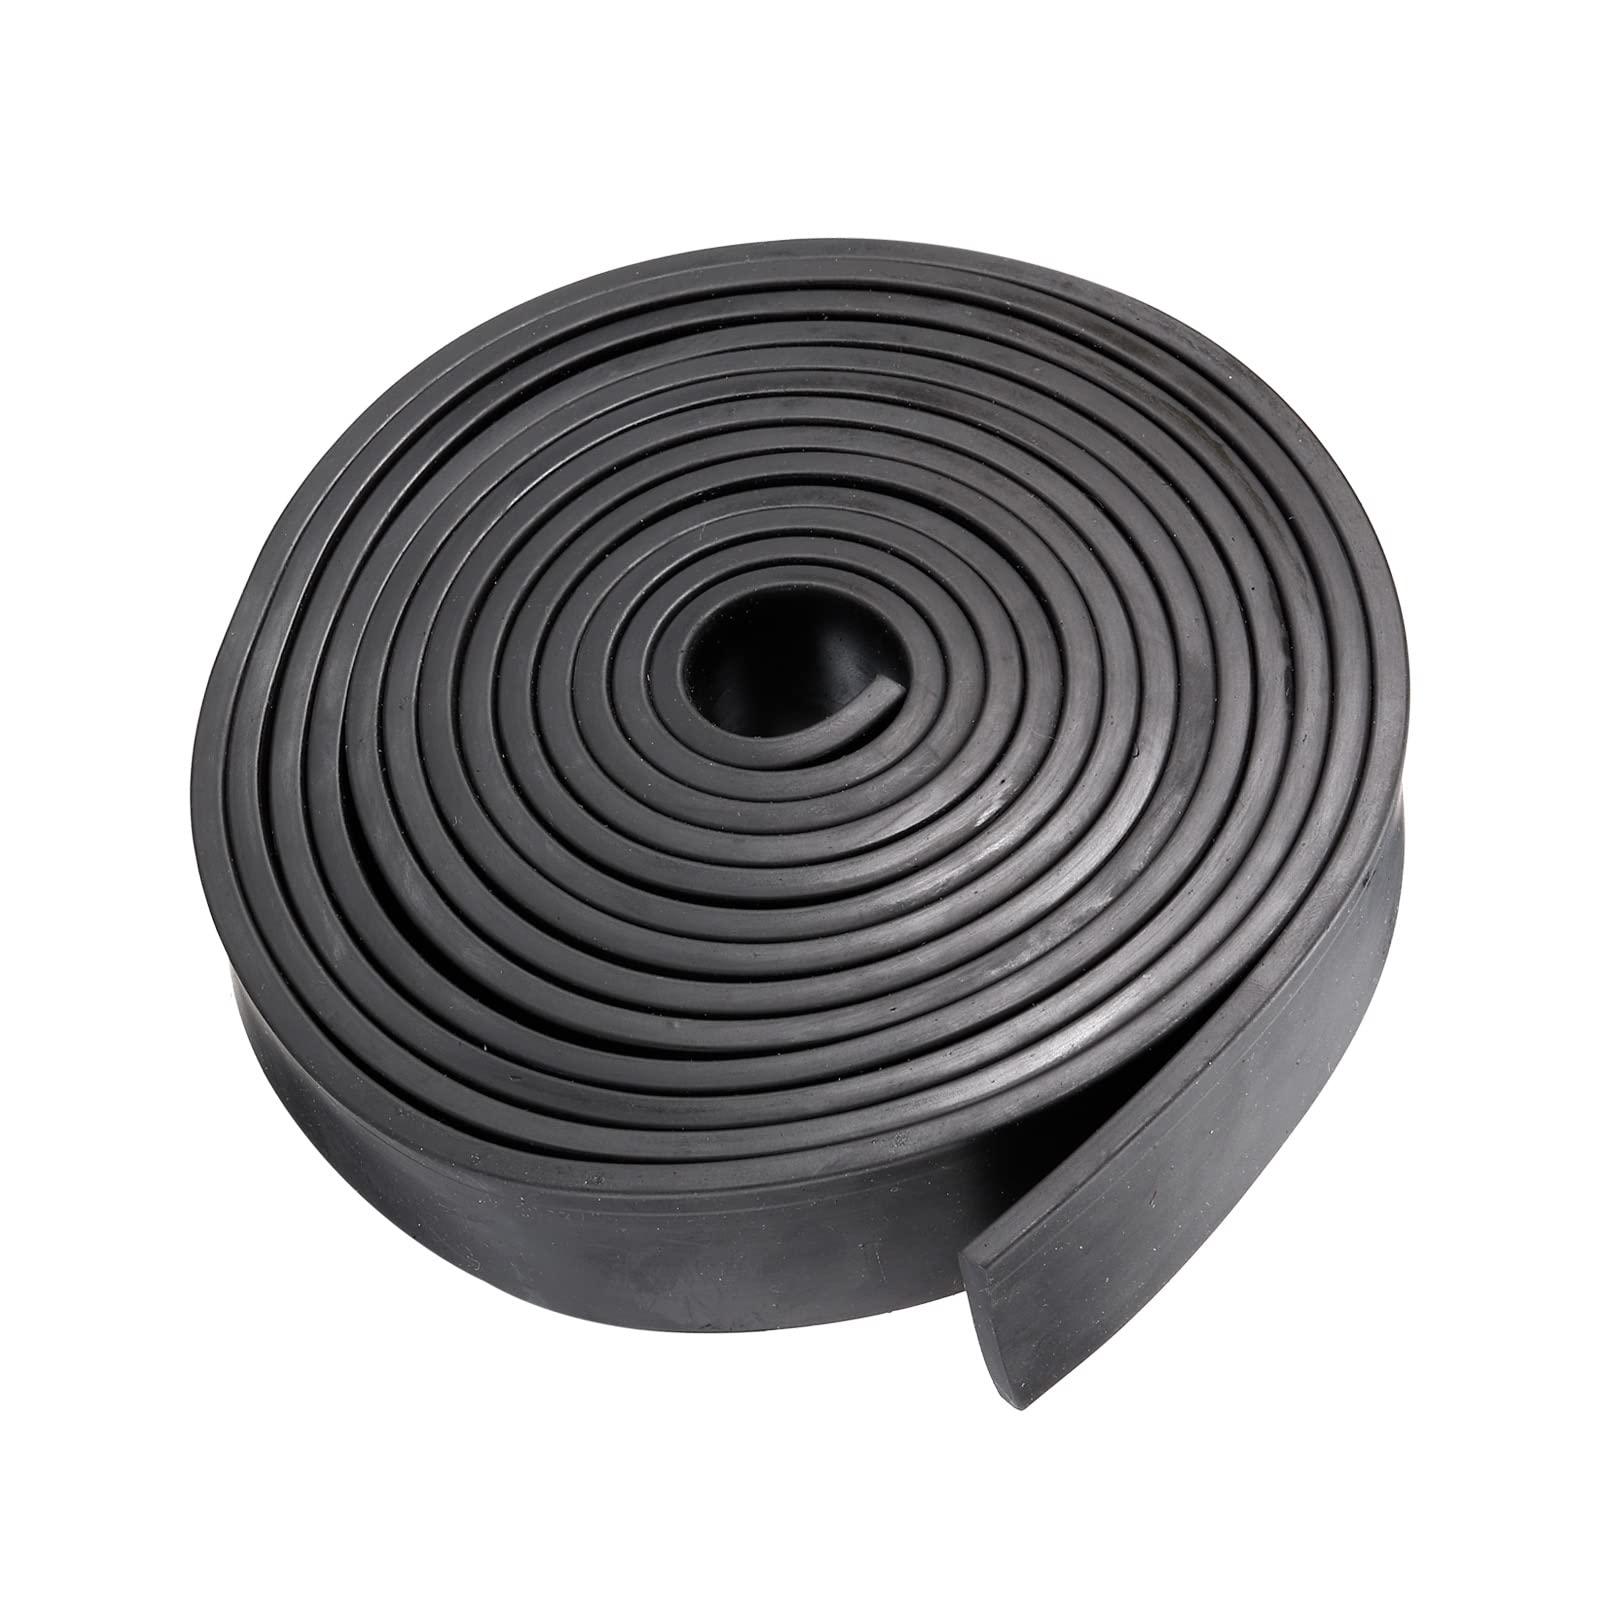 sourcing map Neoprene Rubber Sheet Rolls 5mm(T) x30mm(W) x2m(L), Solid Rubber Strips for DIY Gasket, Sealing Padding, Reduce Vibration Mat 2